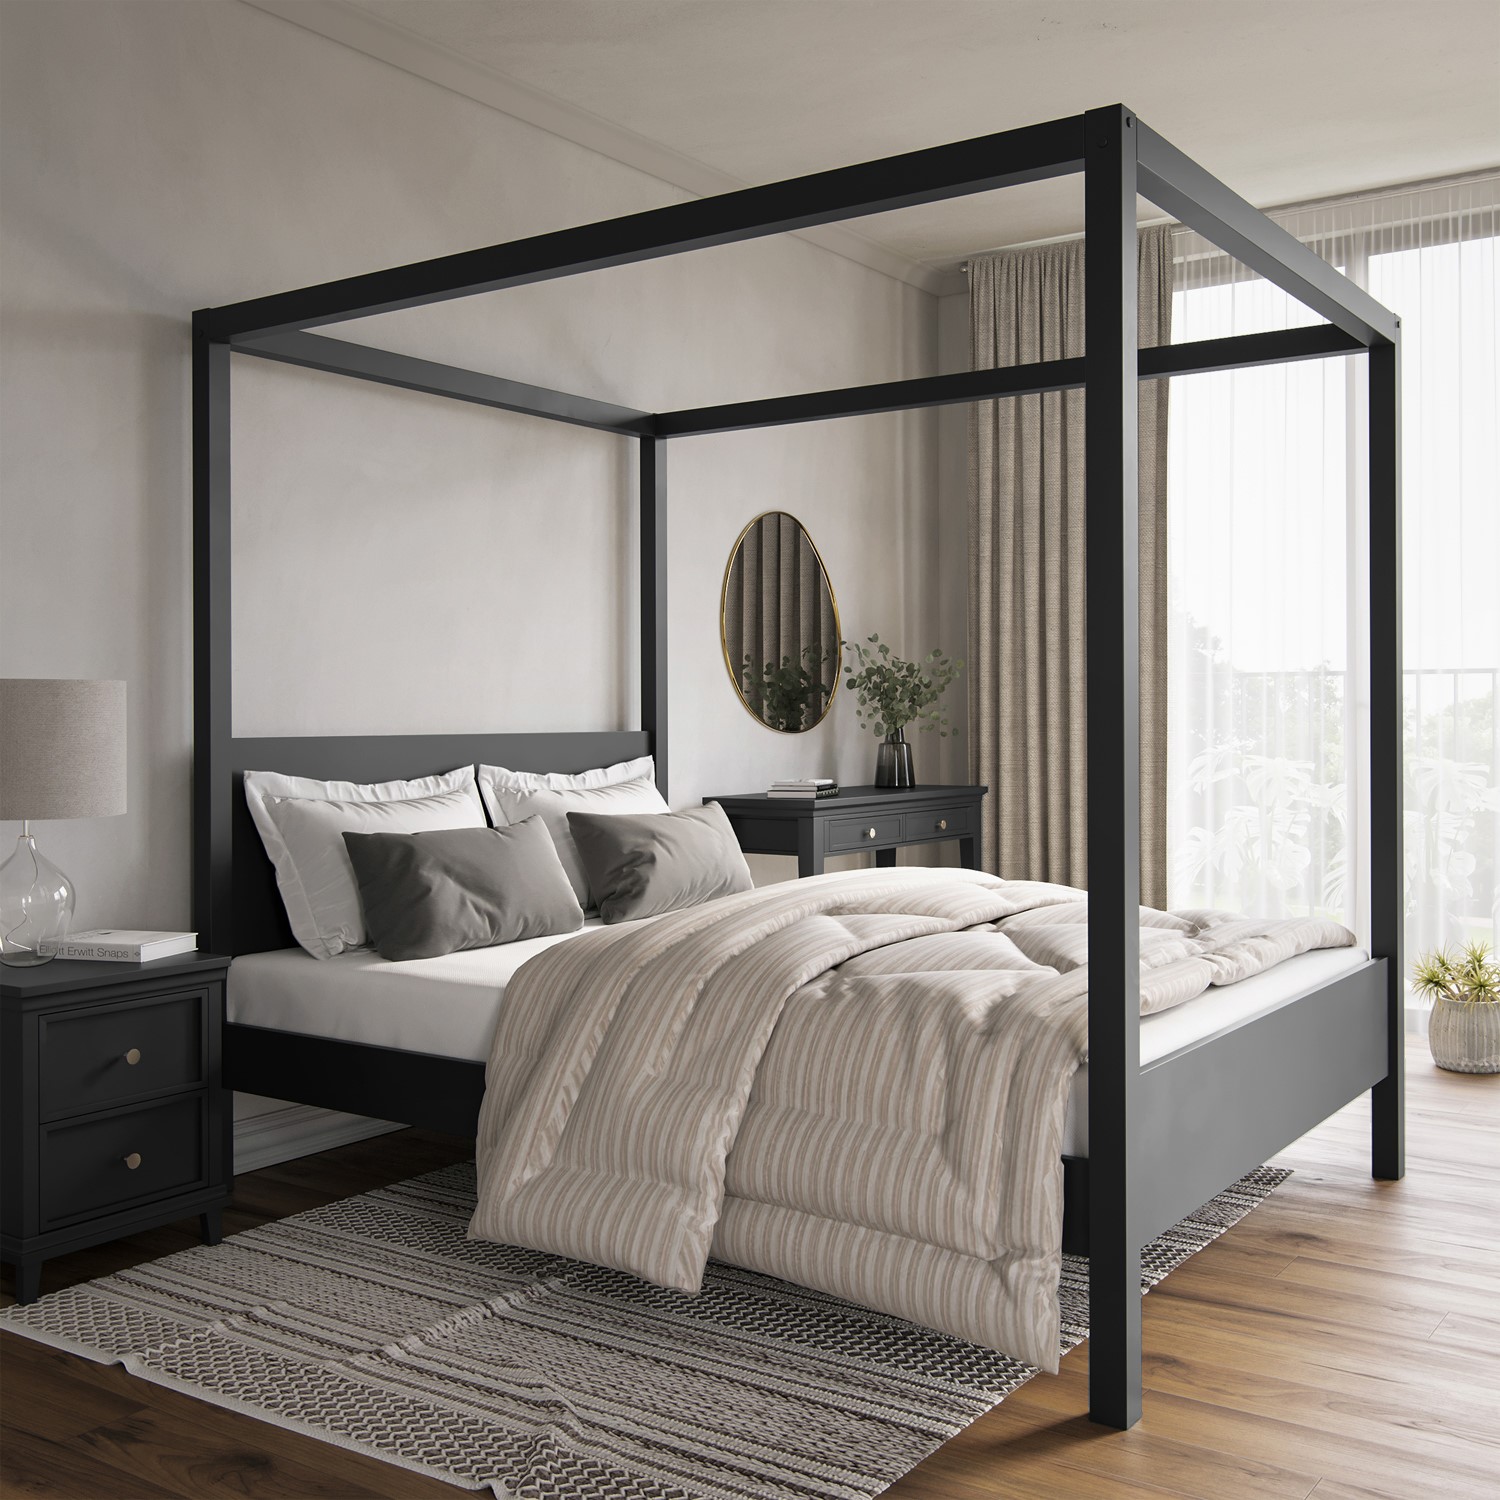 Photo of King size four poster bed frame in black - victoria